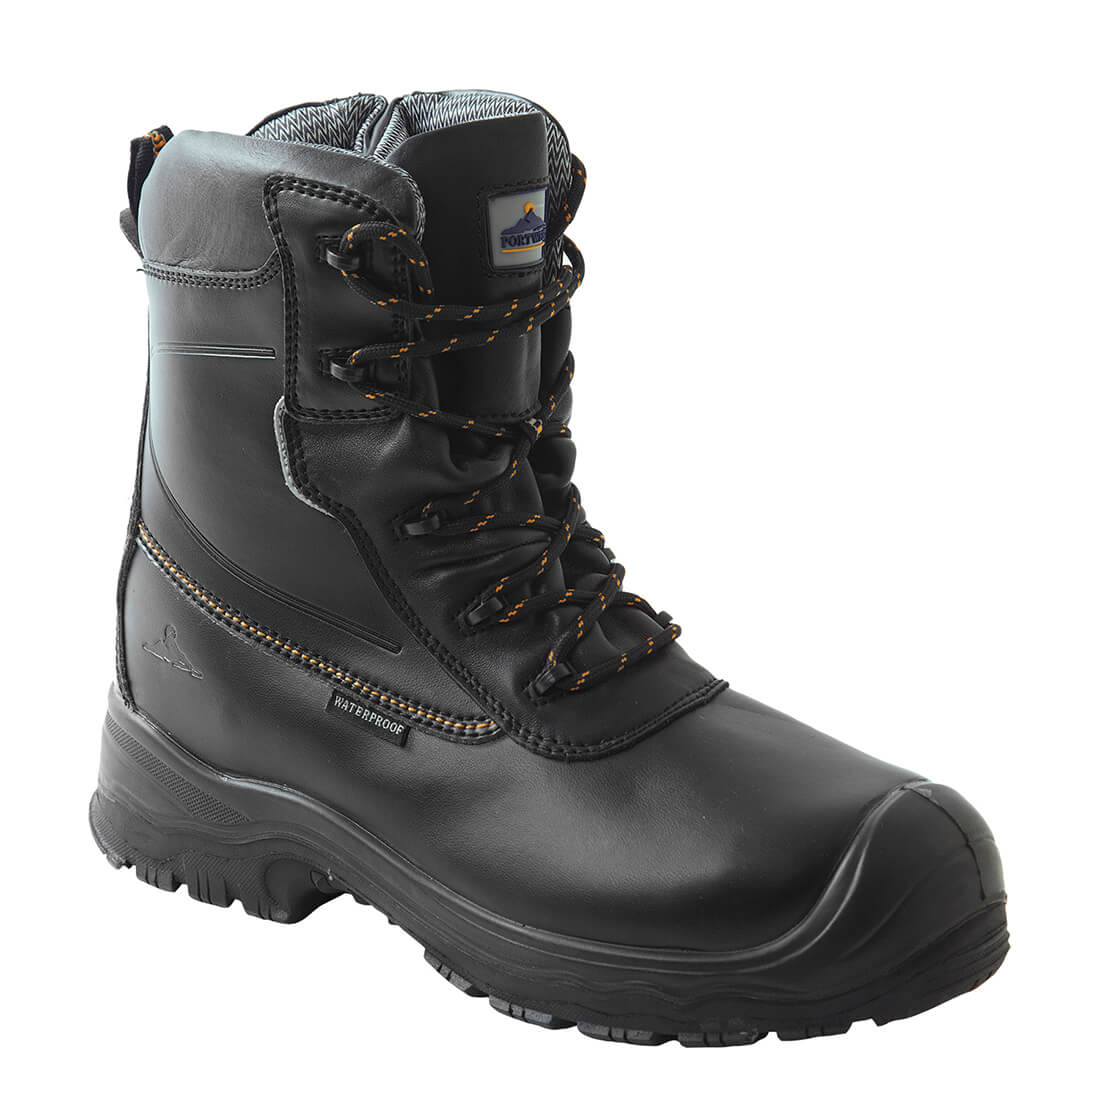 Image of Portwest Mens Compositelite Traction Safety Boots Black Size 10.5